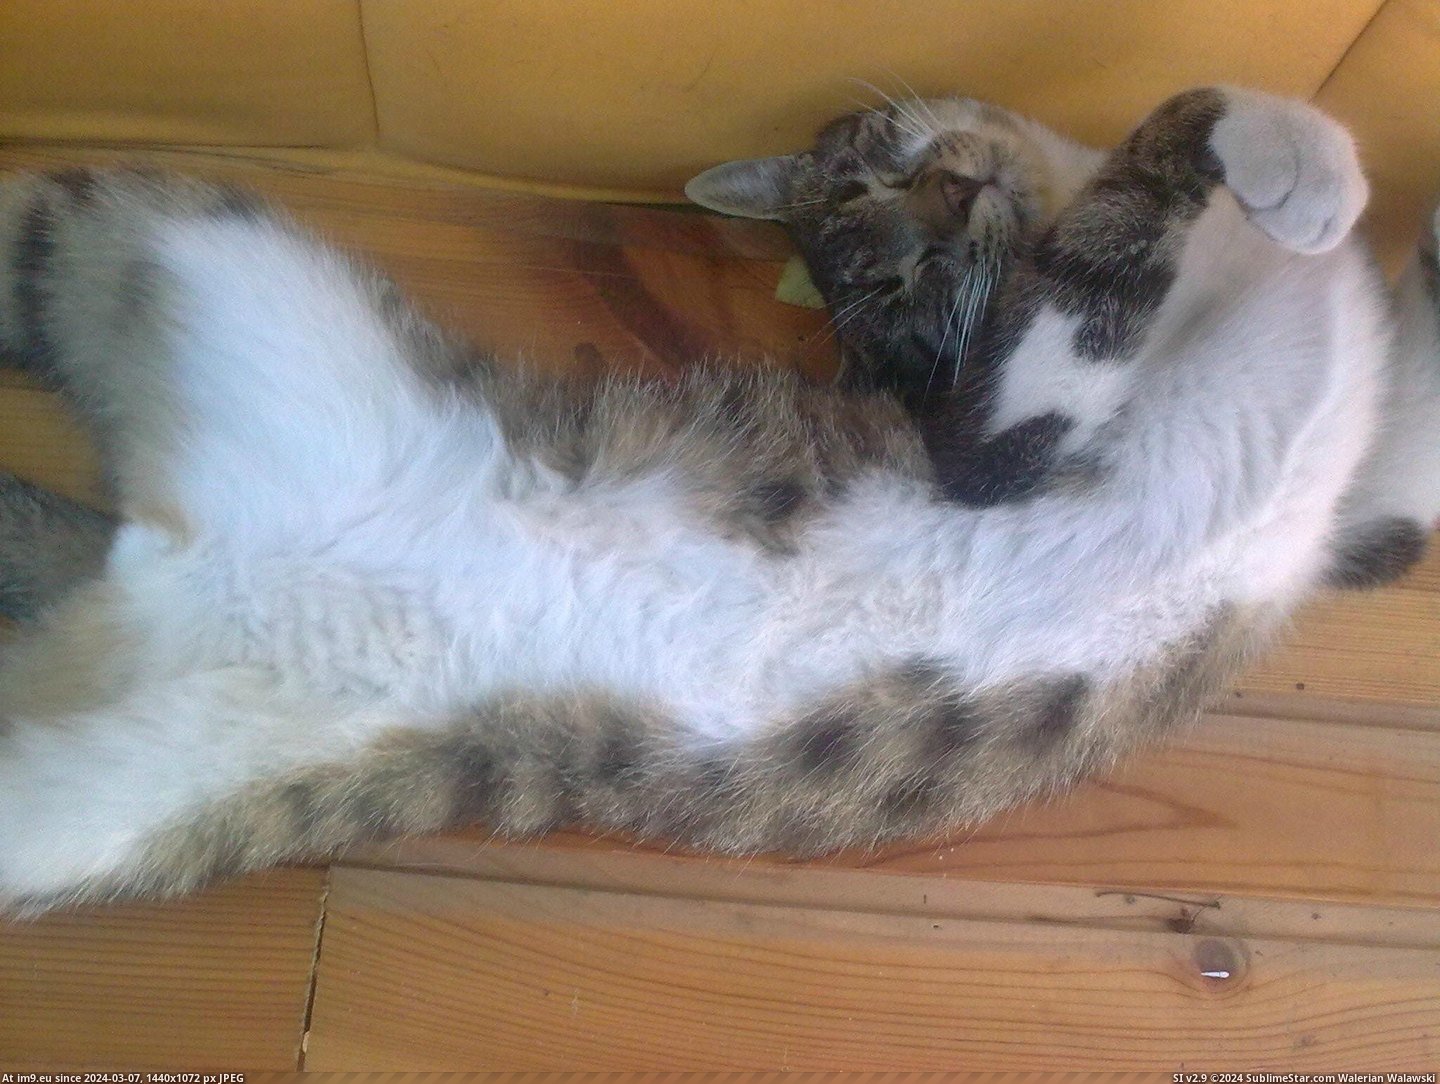 #Cats #Show #Rubs #Way #Belly [Cats] His way to show he wants belly rubs. Pic. (Изображение из альбом My r/CATS favs))